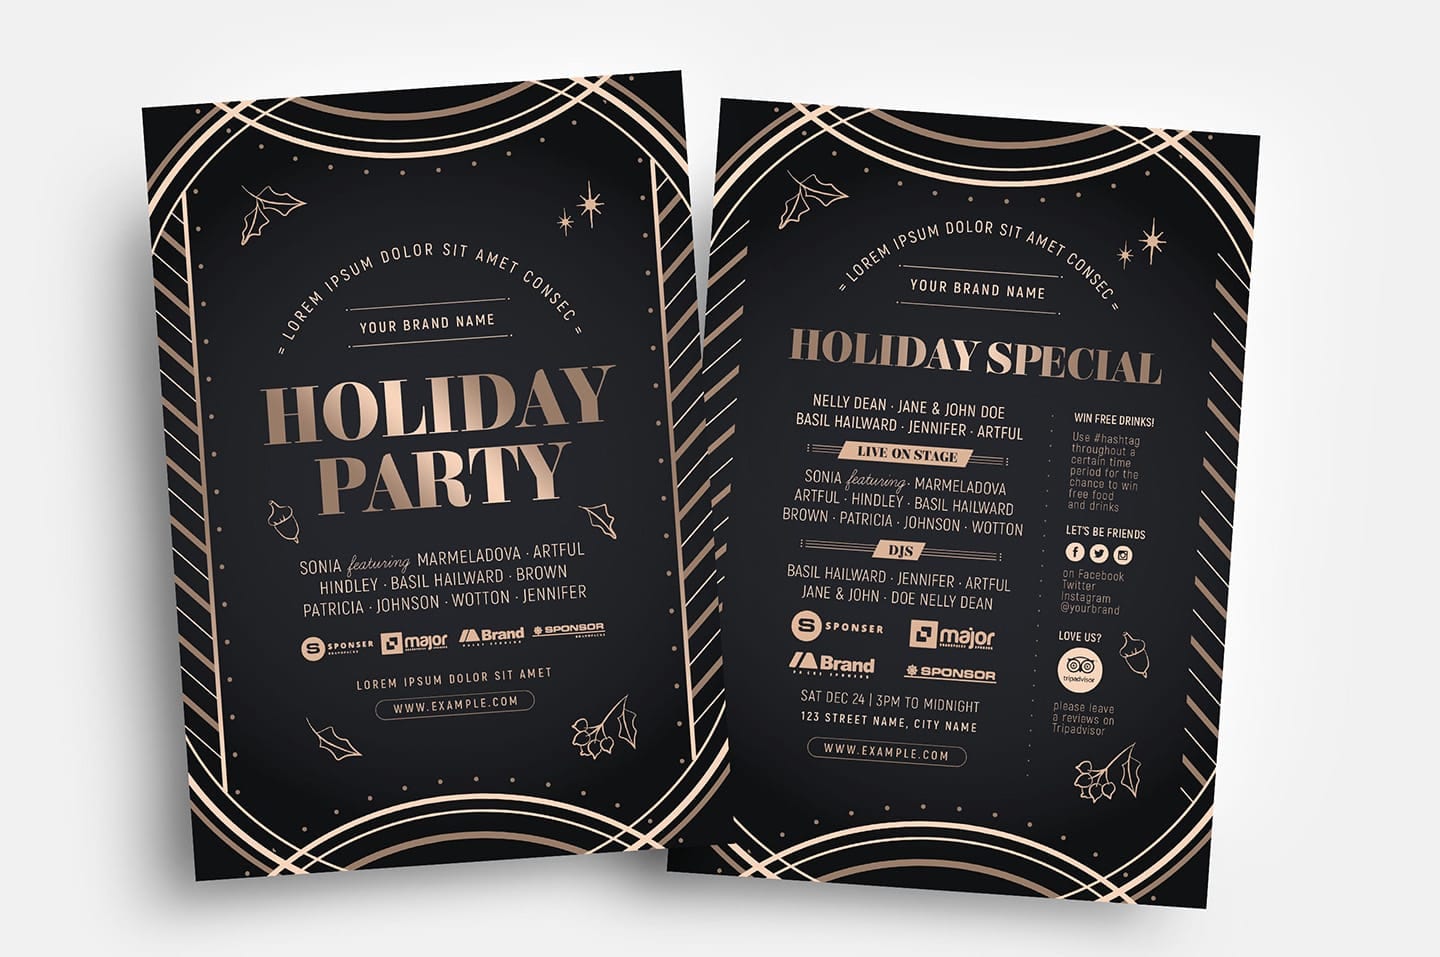 Holiday Party Flyer Template - PSD, Ai & Vector - BrandPacks Pertaining To Free Holiday Flyer Templates